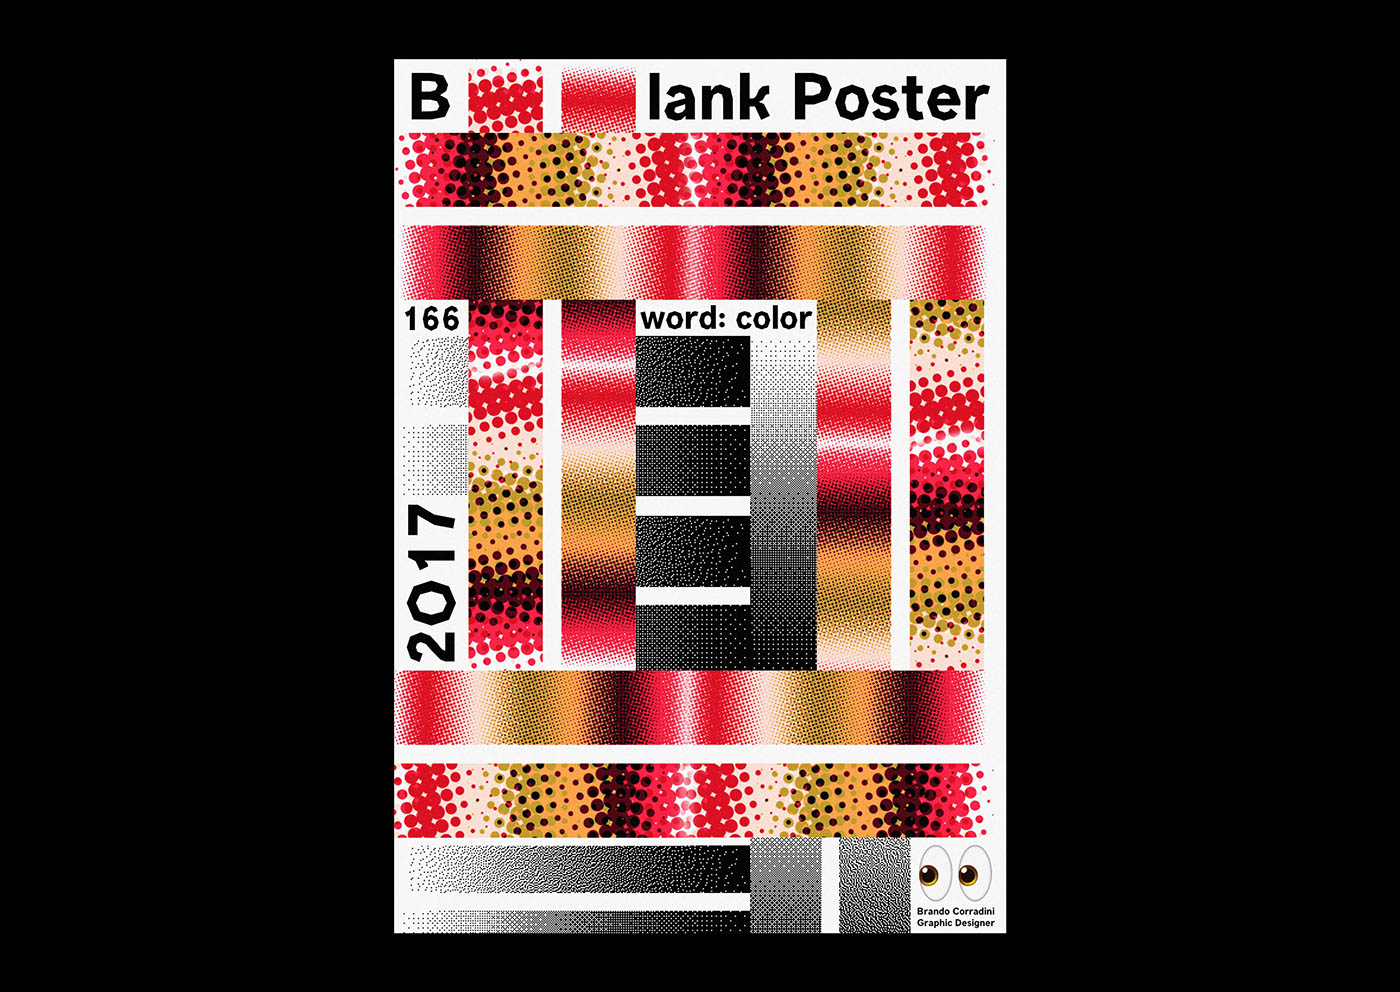 Blank Poster blankposter poster color plakat Plakate graphic design colors